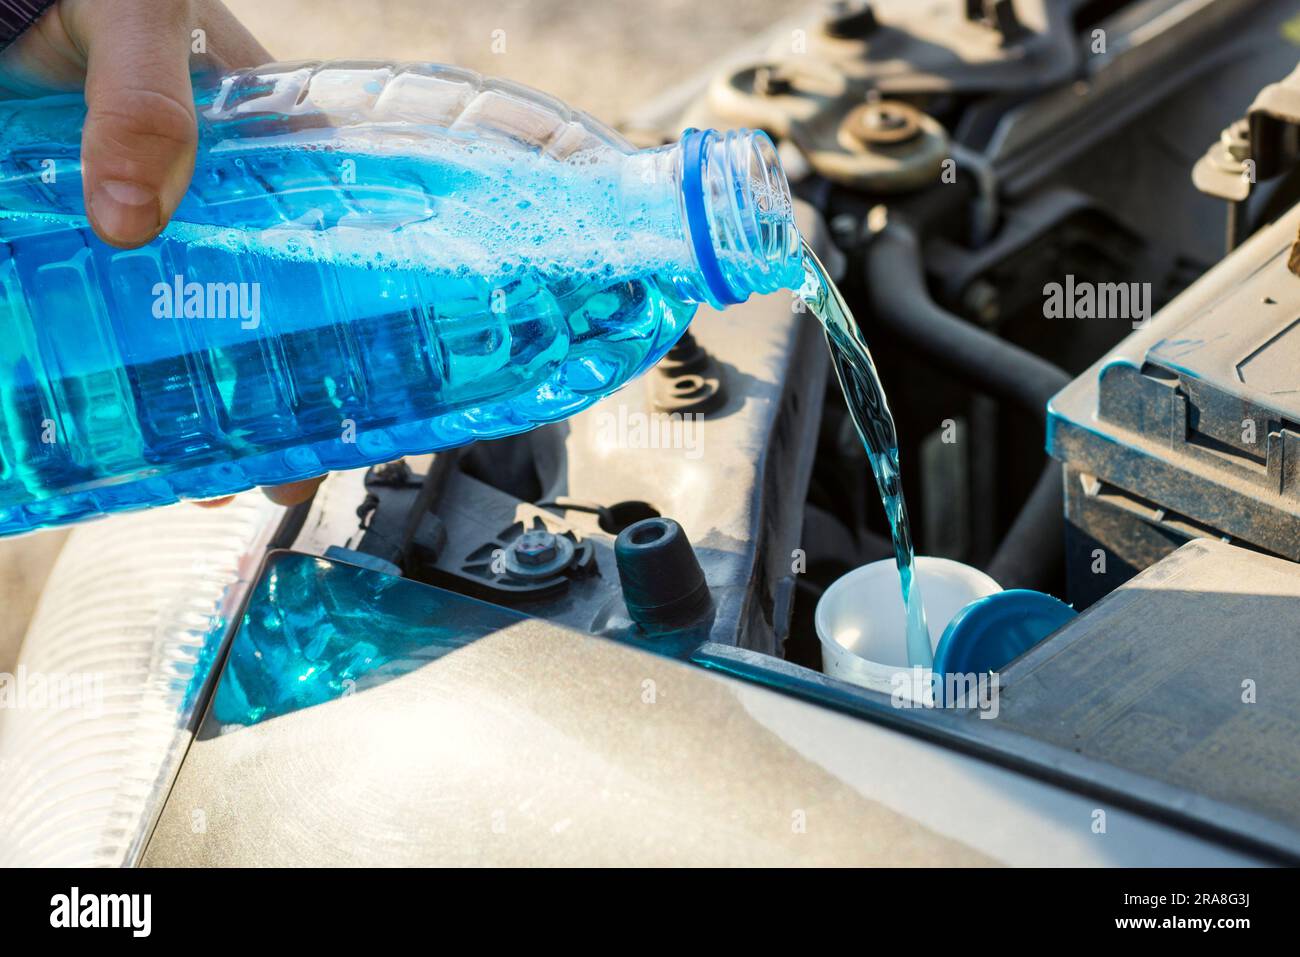 How to Fill Windshield Washer Fluid 